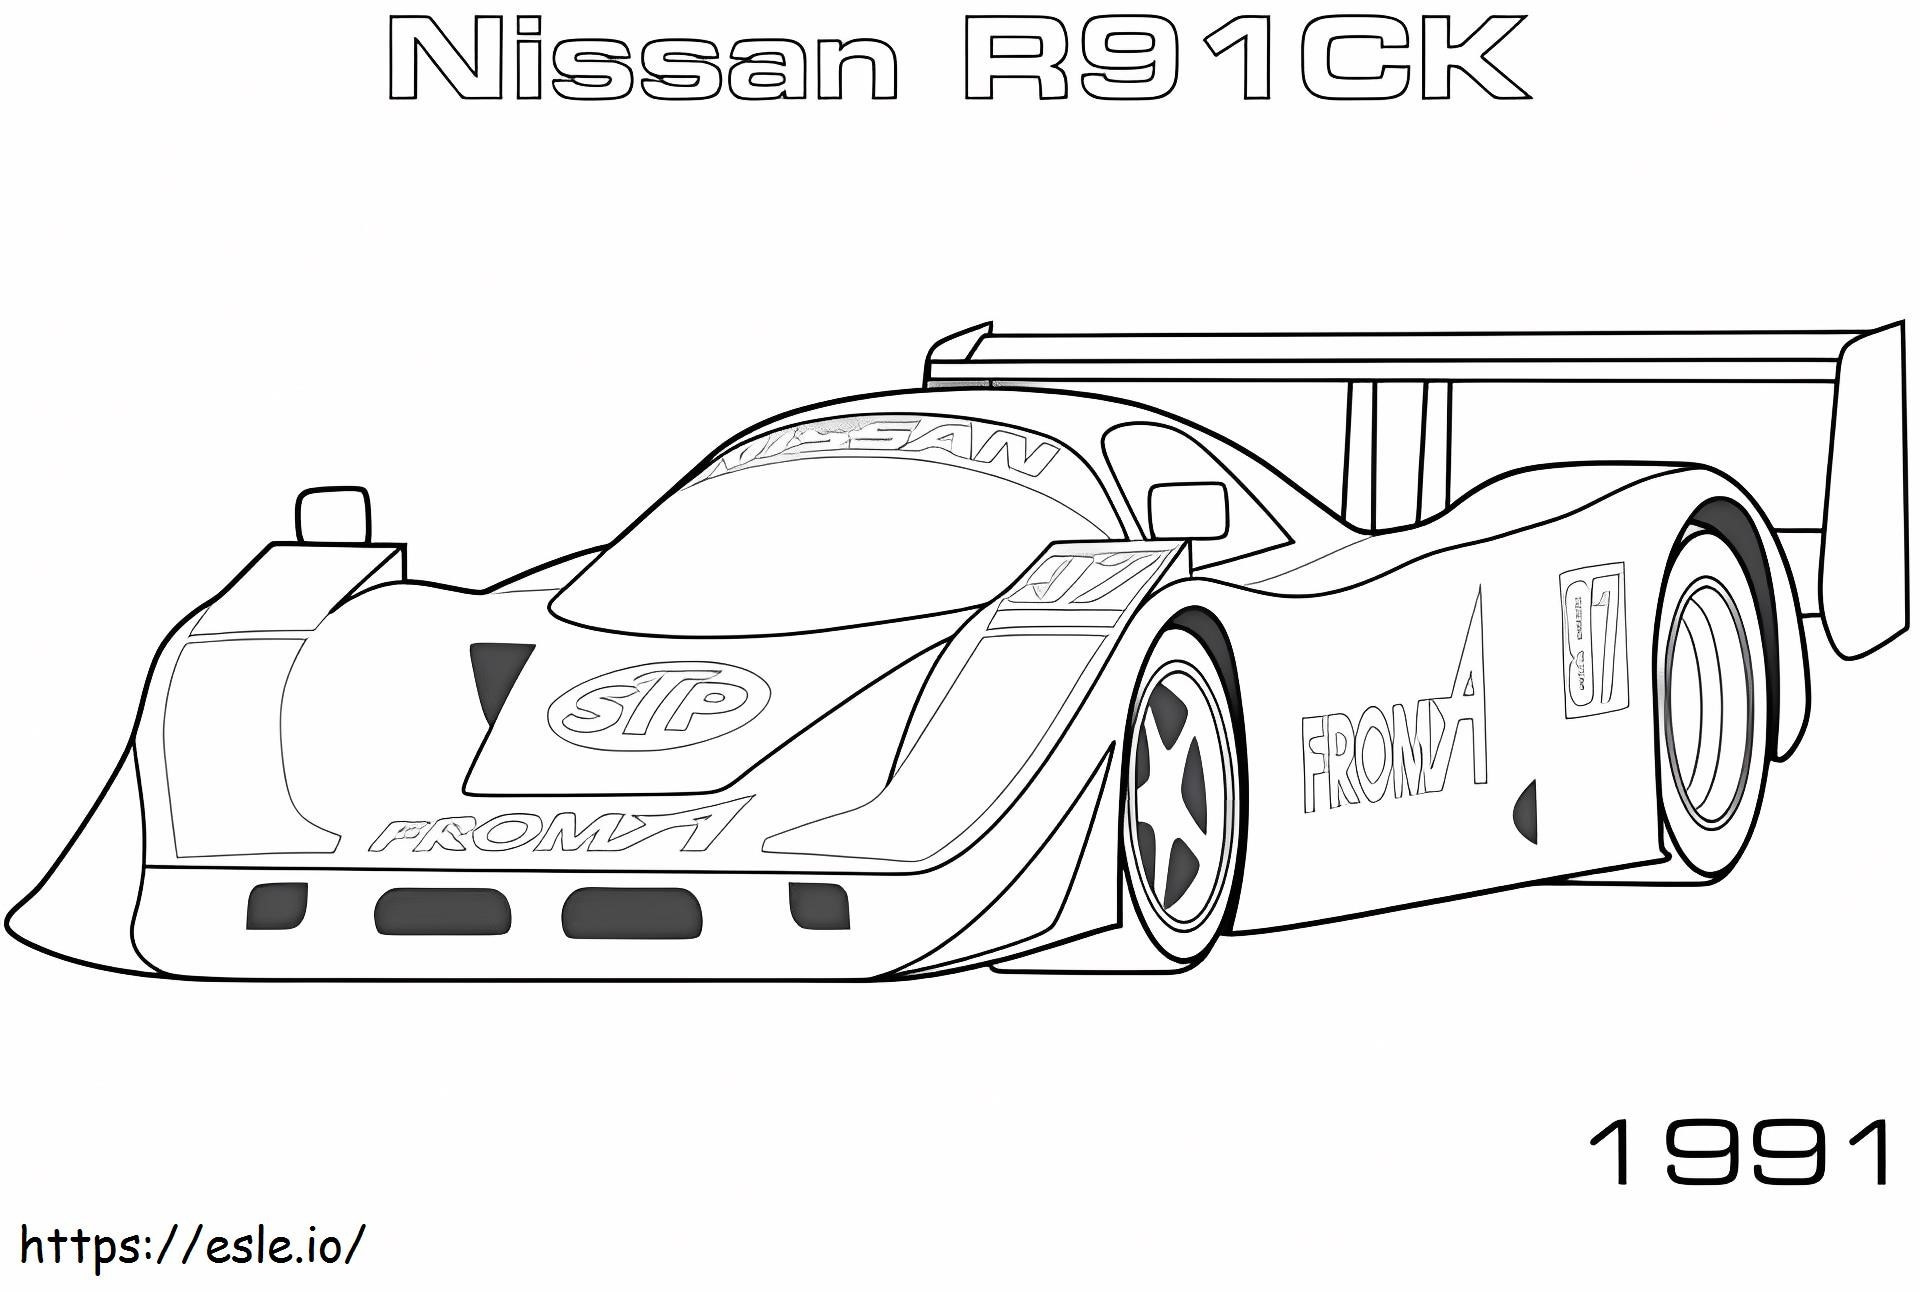 Nissan R91Ck coloring page